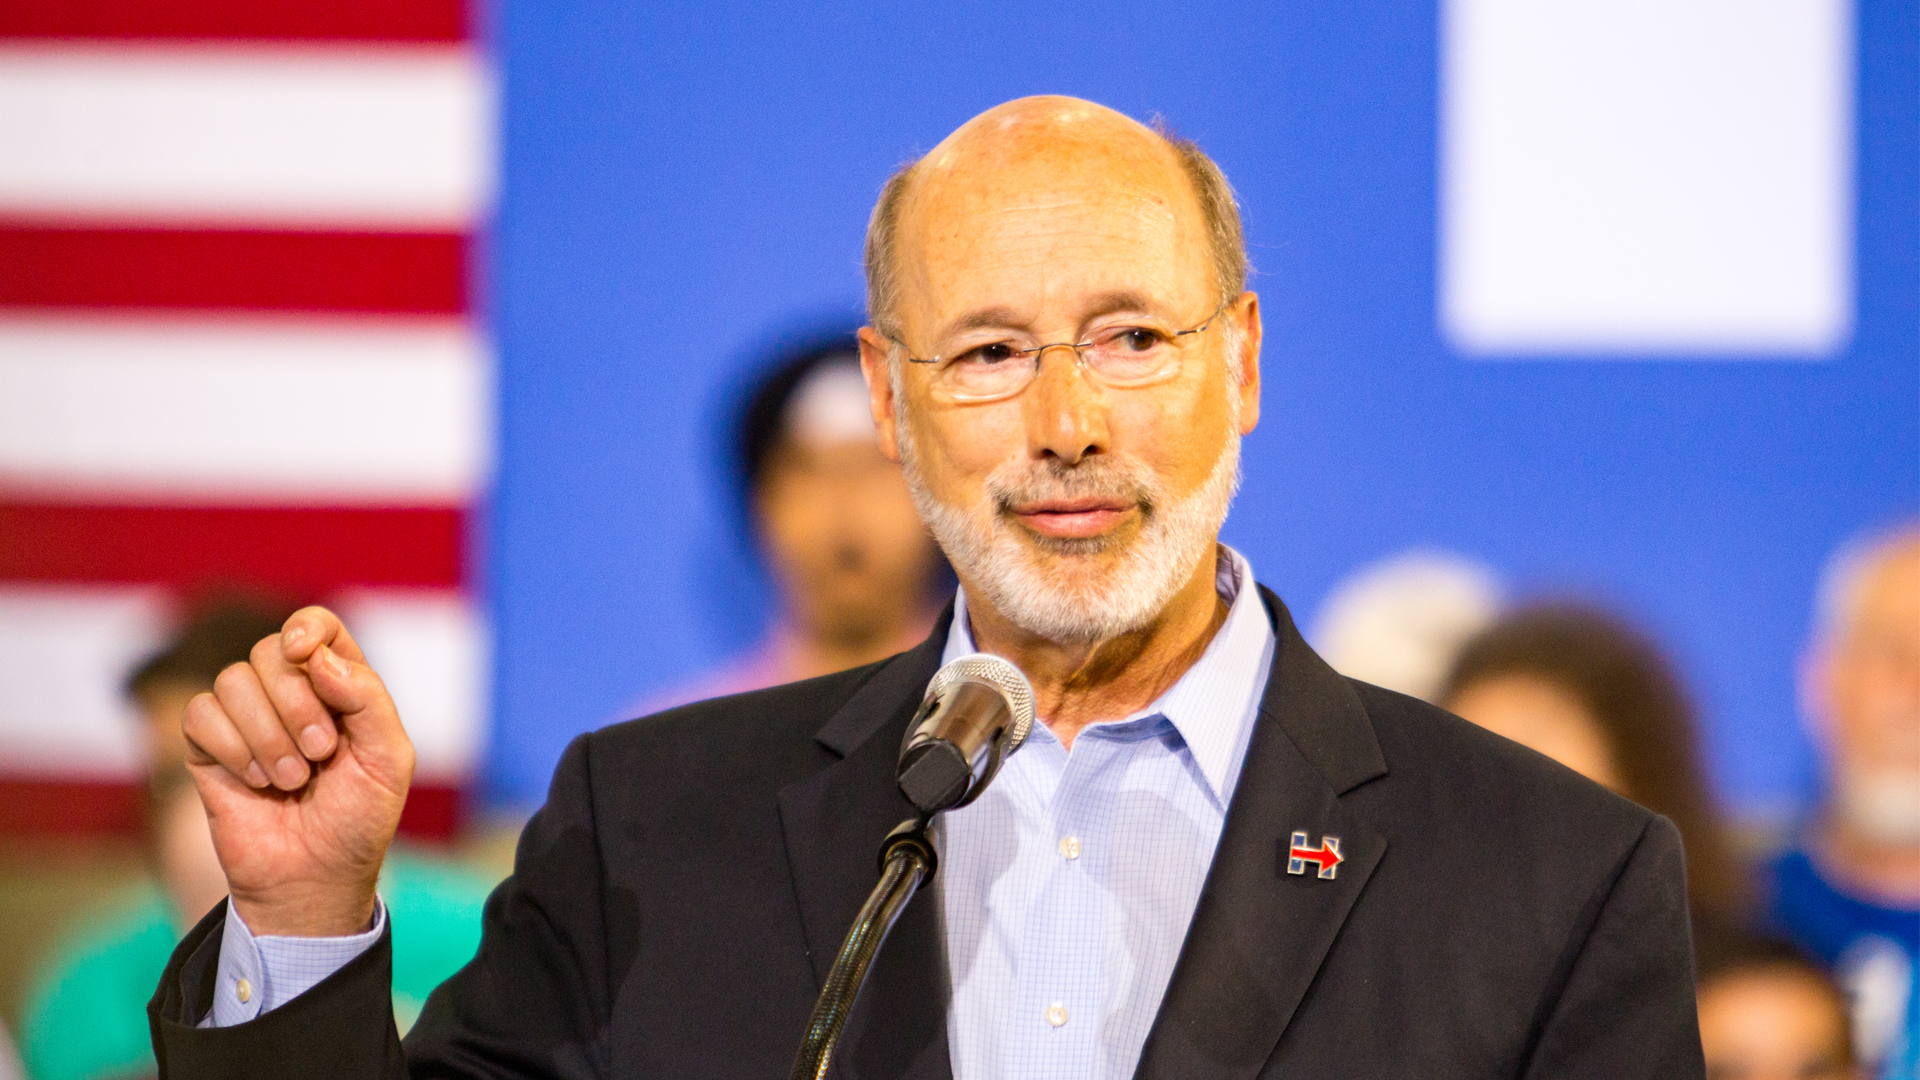 Union officials declare support for Gov. Wolf budget, which includes middle-class tax increase